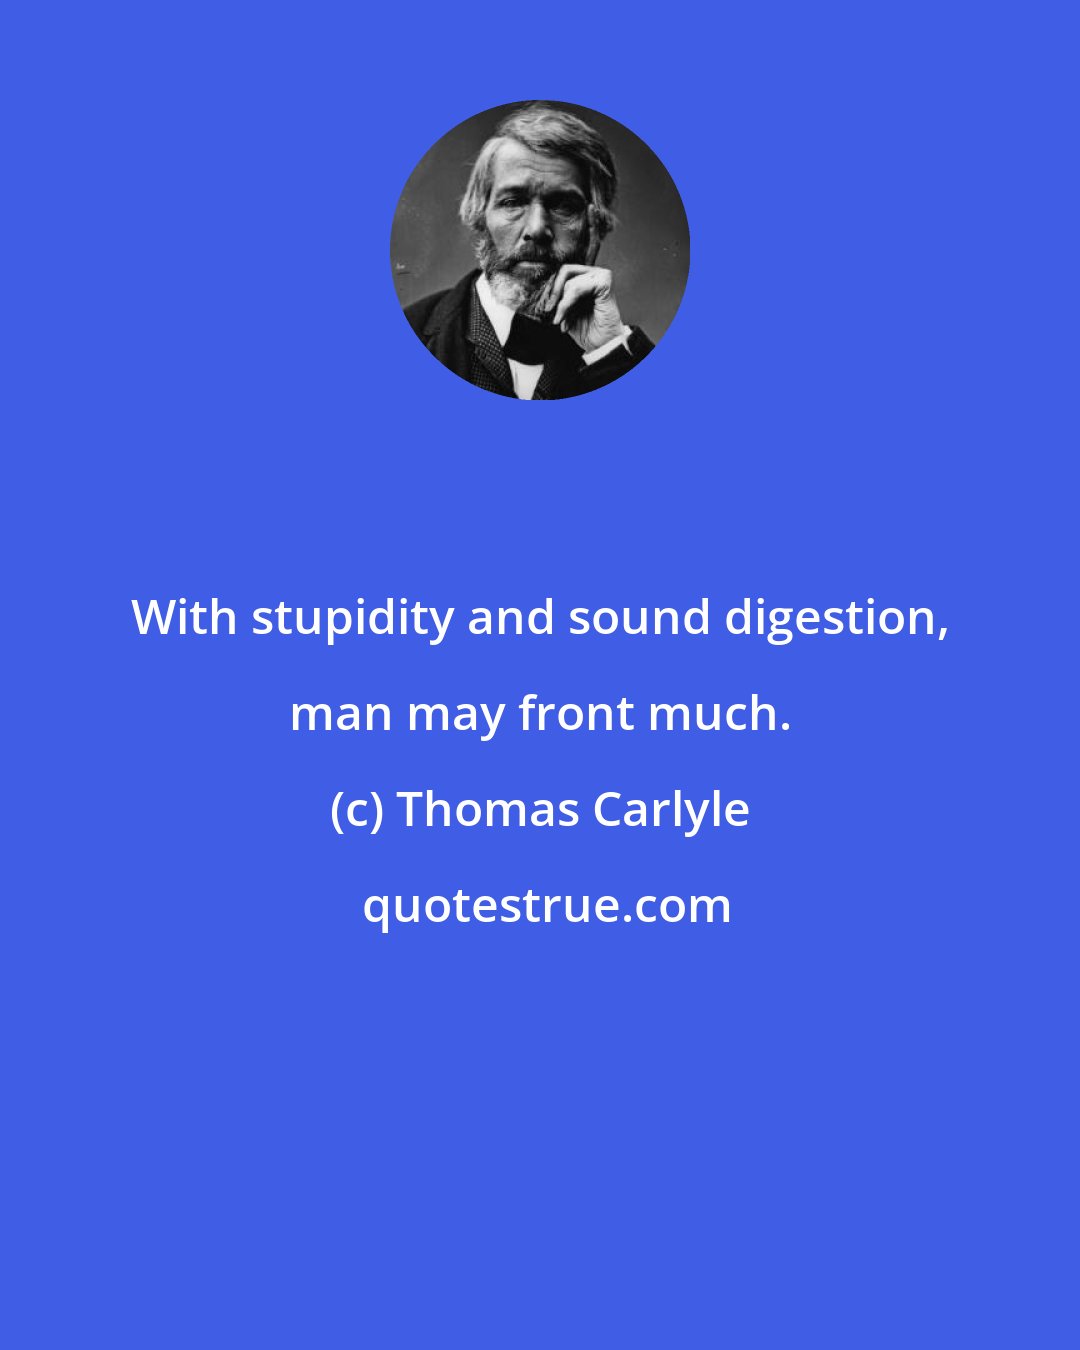 Thomas Carlyle: With stupidity and sound digestion, man may front much.